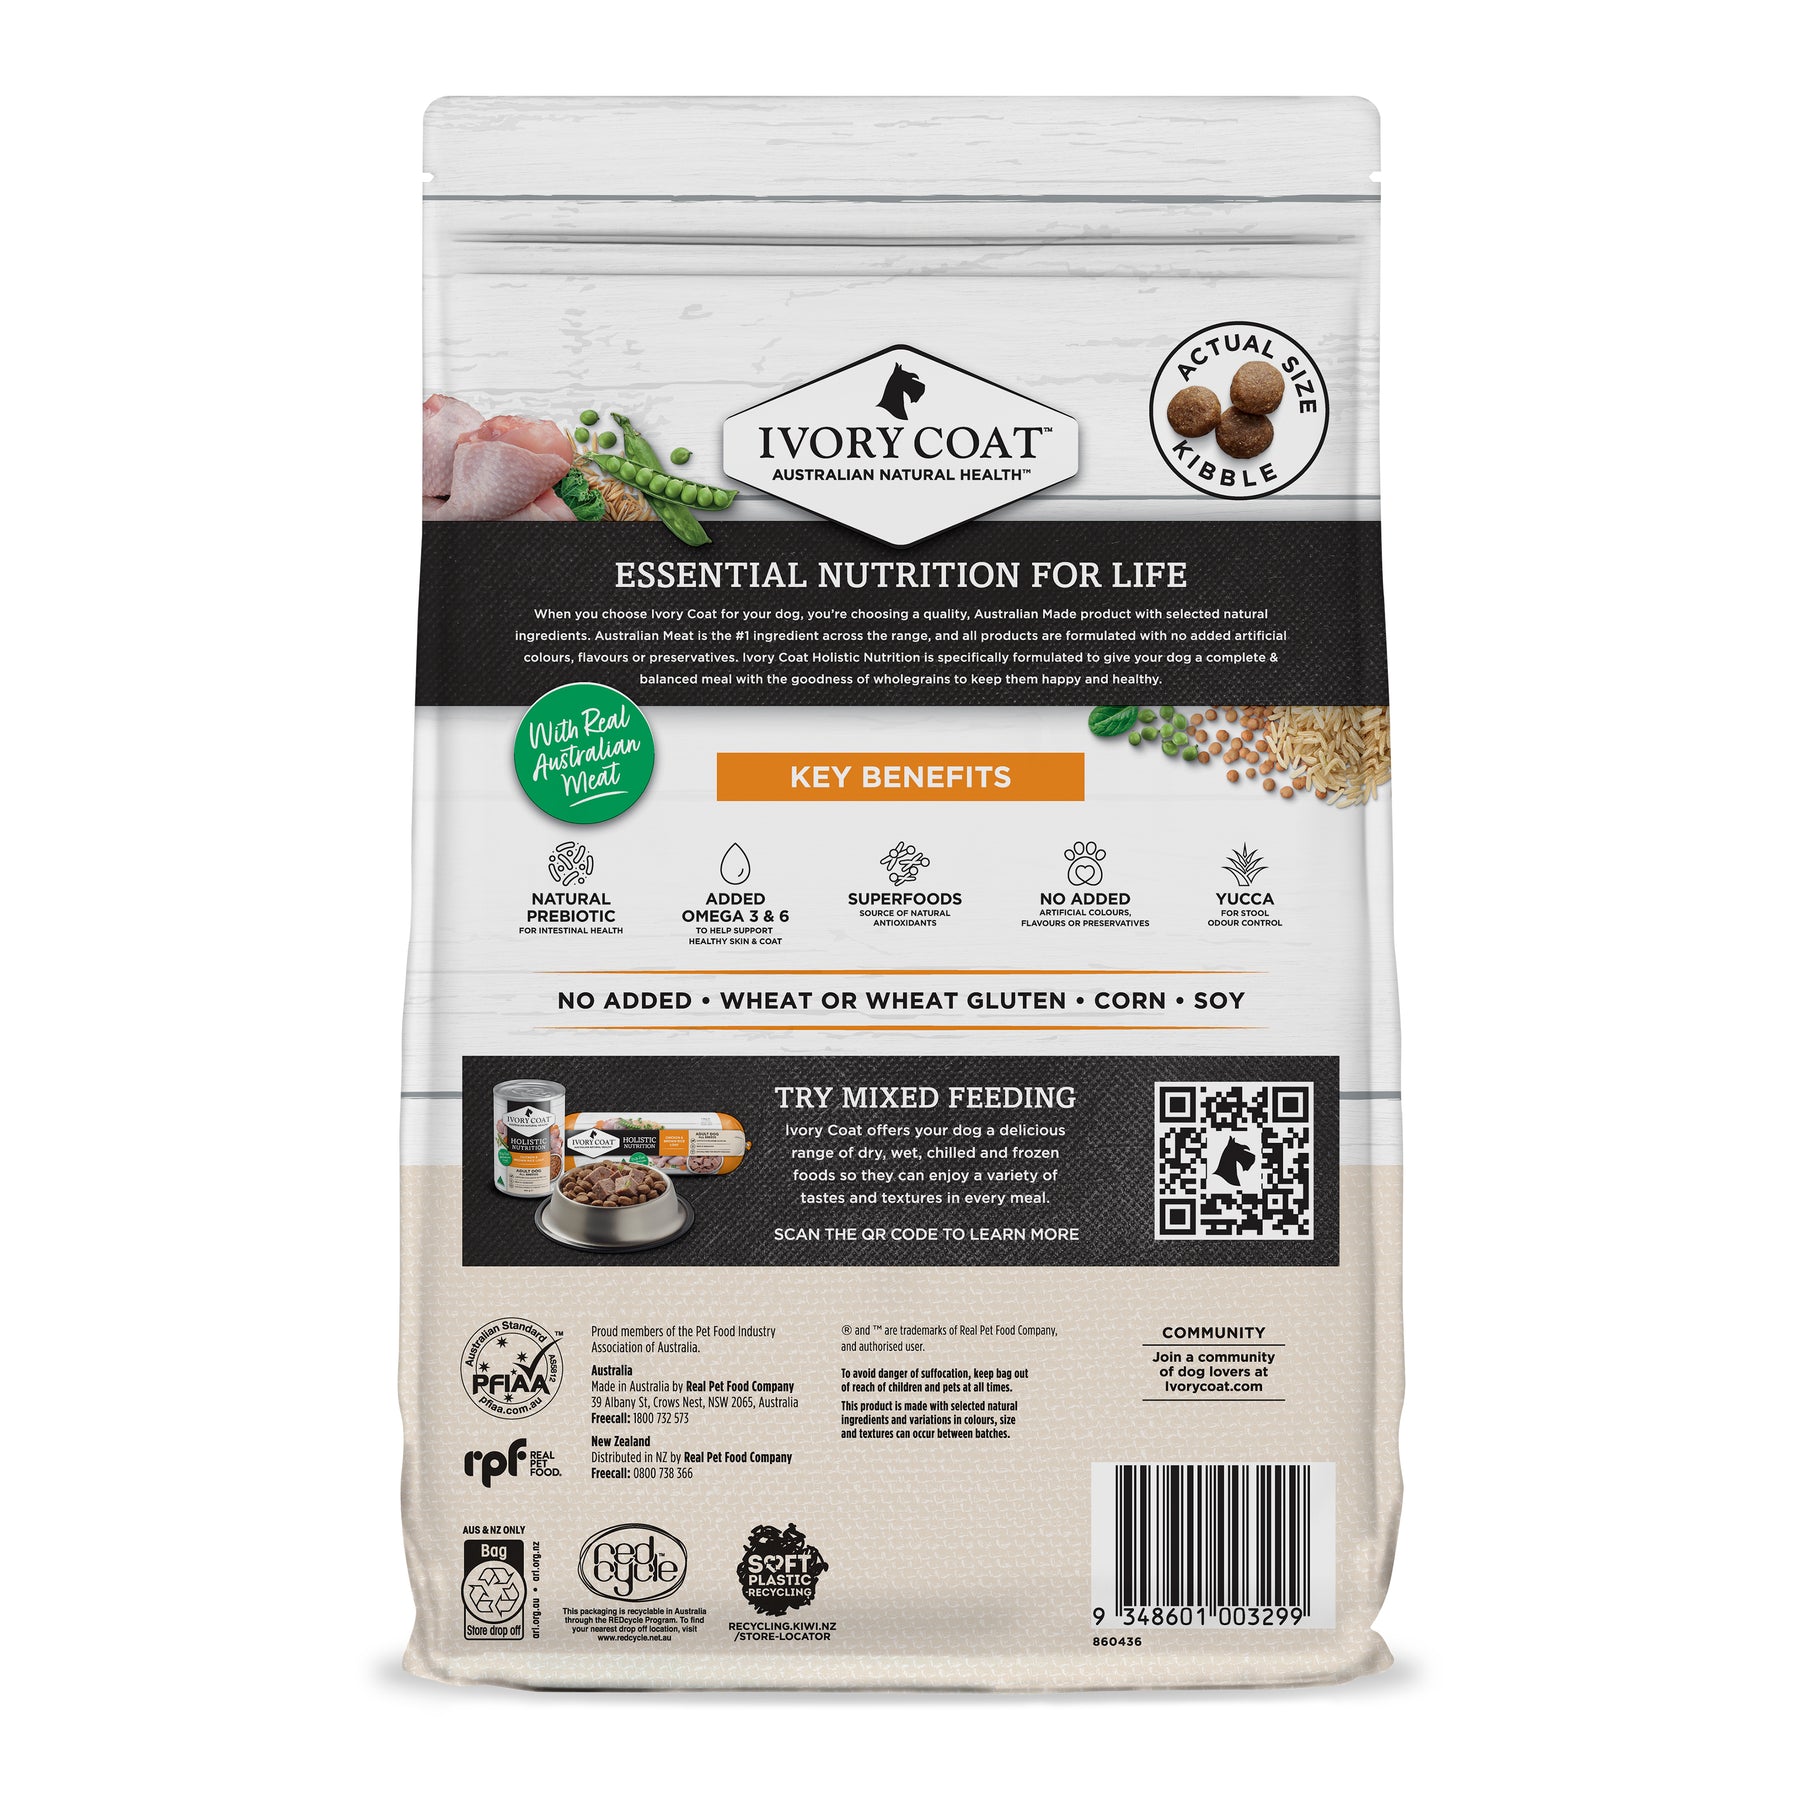 Holistic Nutrition Adult All Breeds Dry Dog Food Chicken & Brown Rice